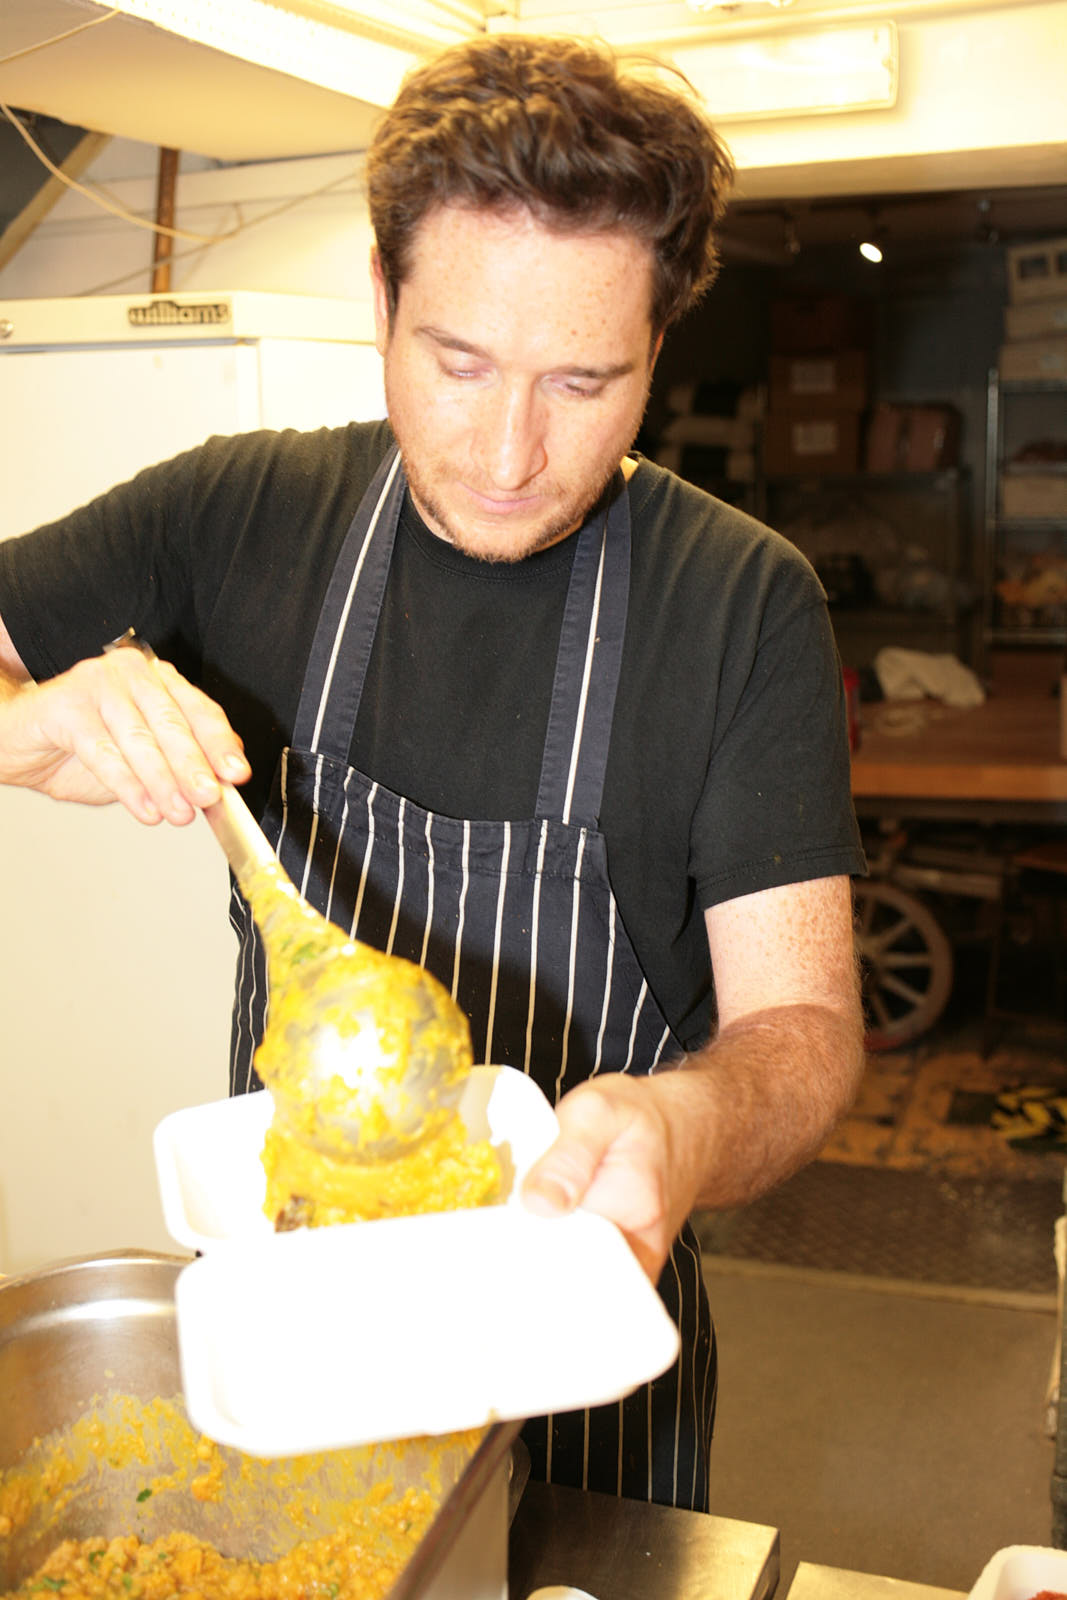 Chef Nick Bramham preparing meals for Deliver Aid NHS workers in the kitchen at Quality Wines